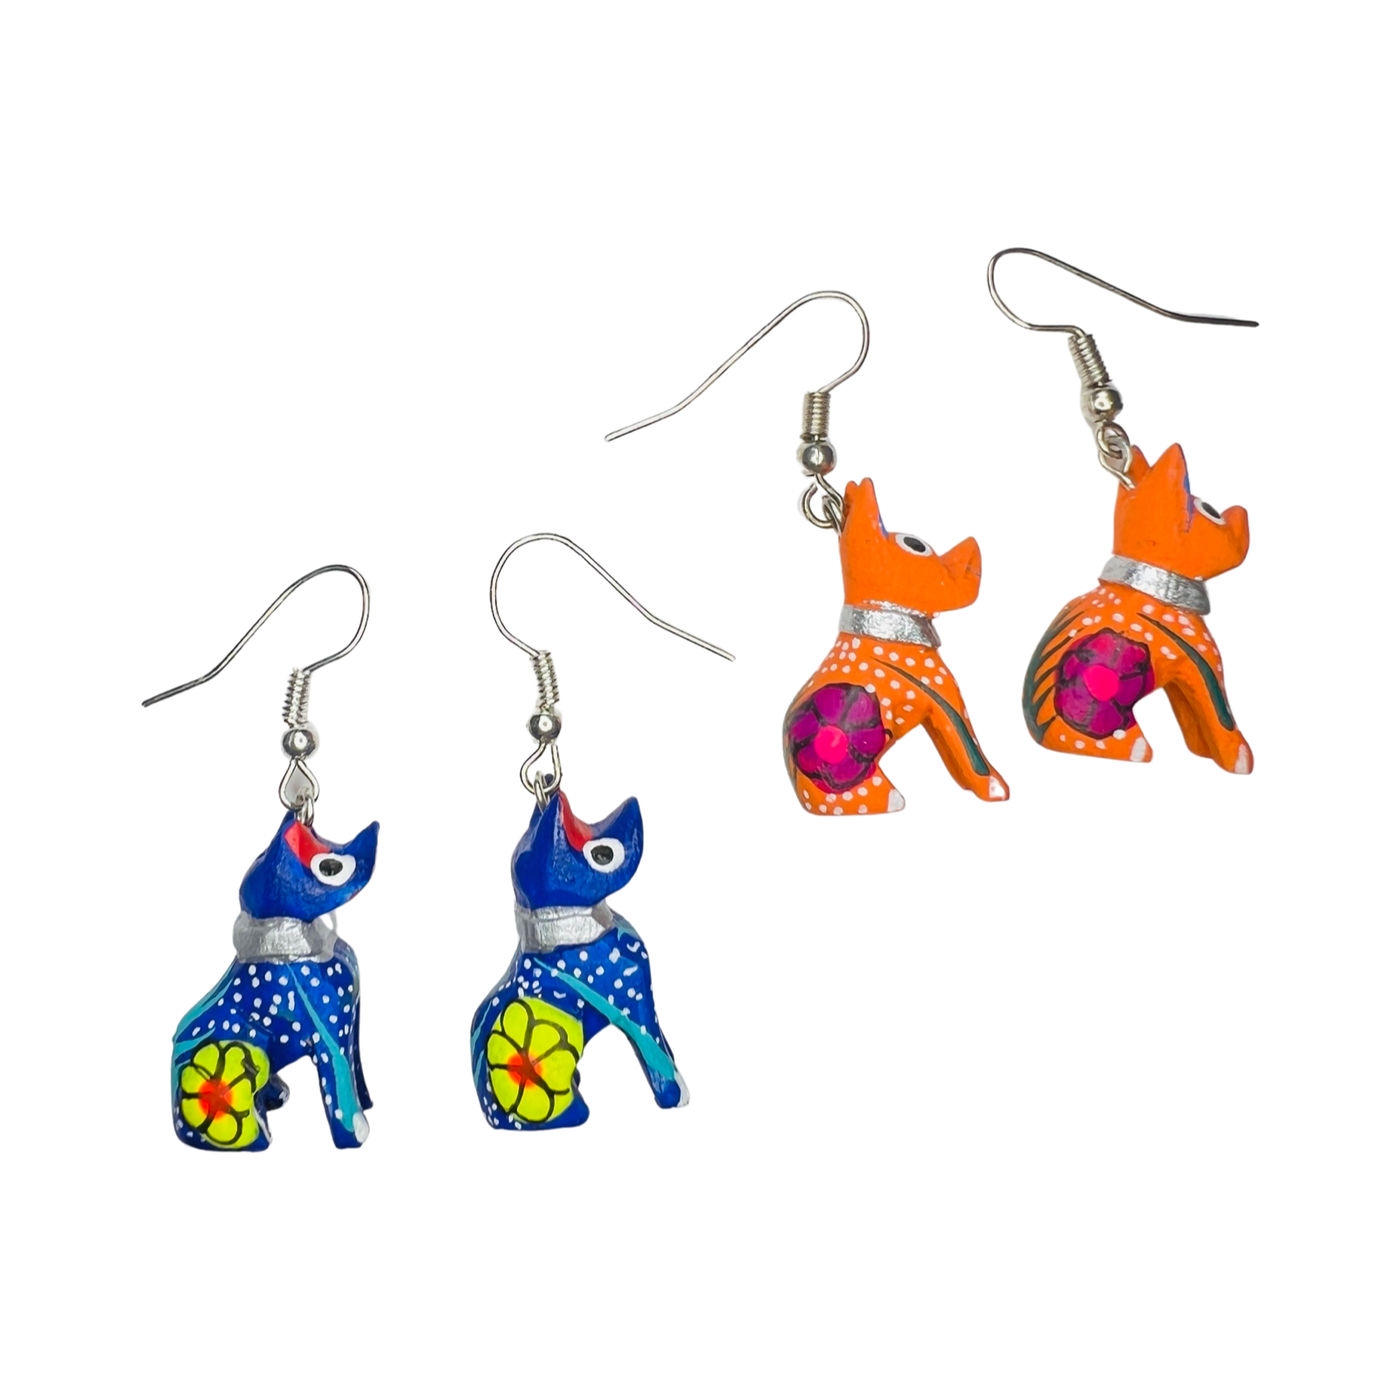 2 sets of handpainted earrings of colorful alebrije dogs; one orange and one blue